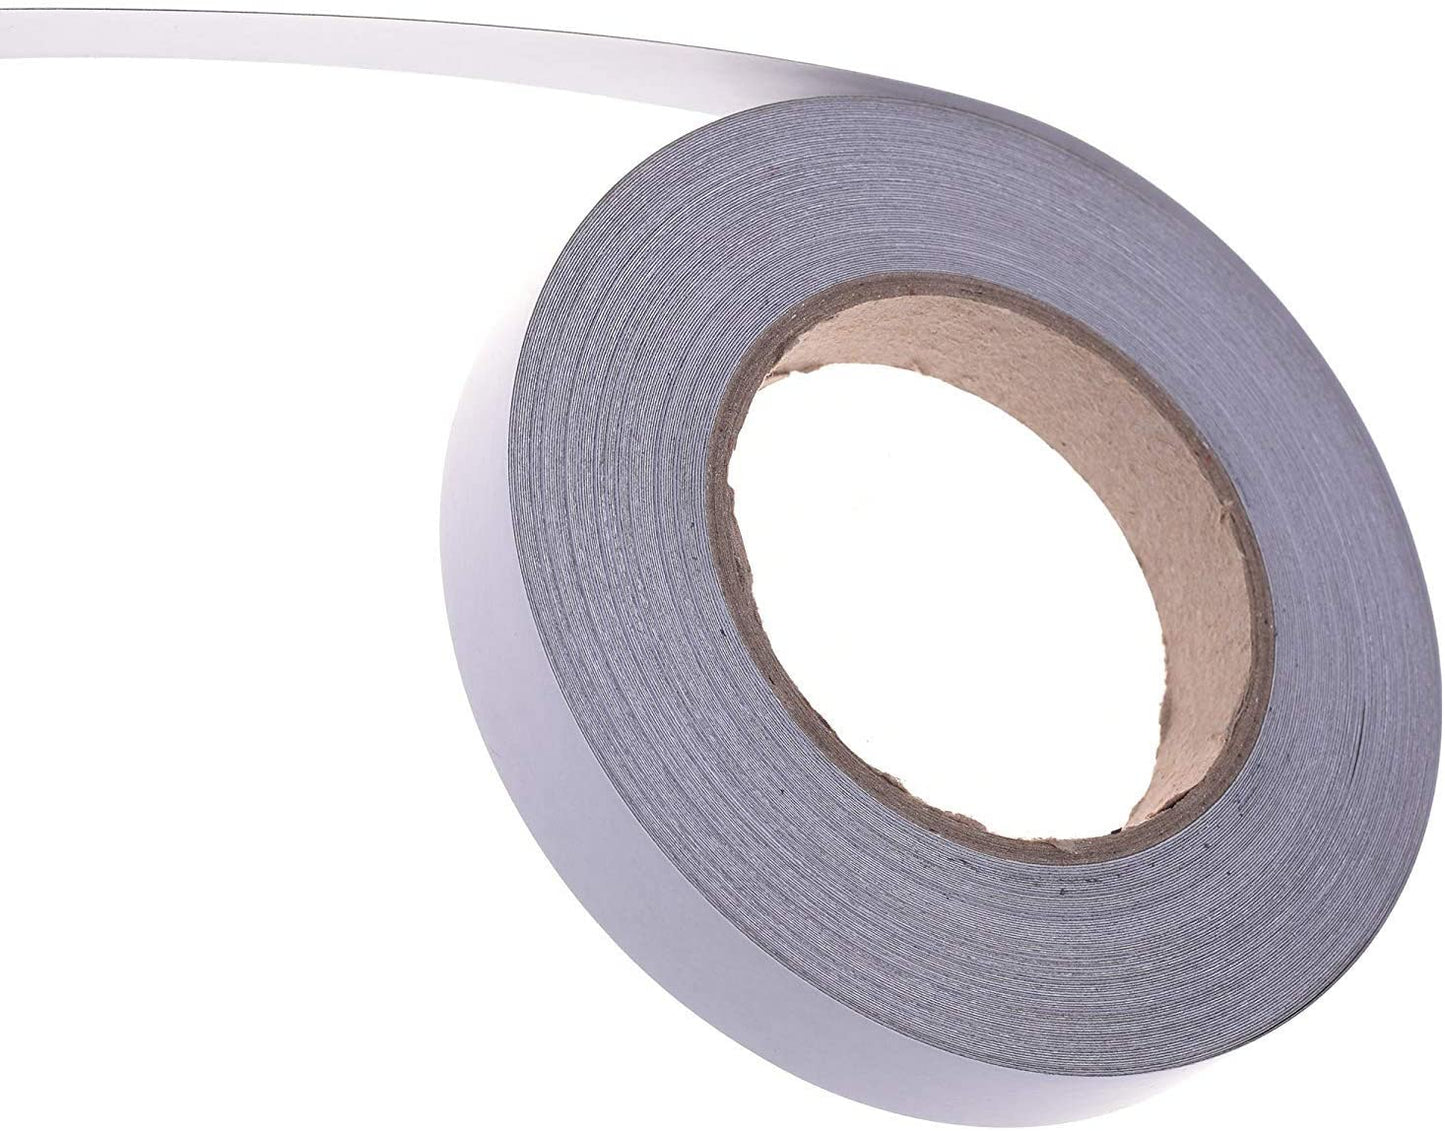 Fabric Cloth Tape 5mm x 20m with Conductive Adhesive